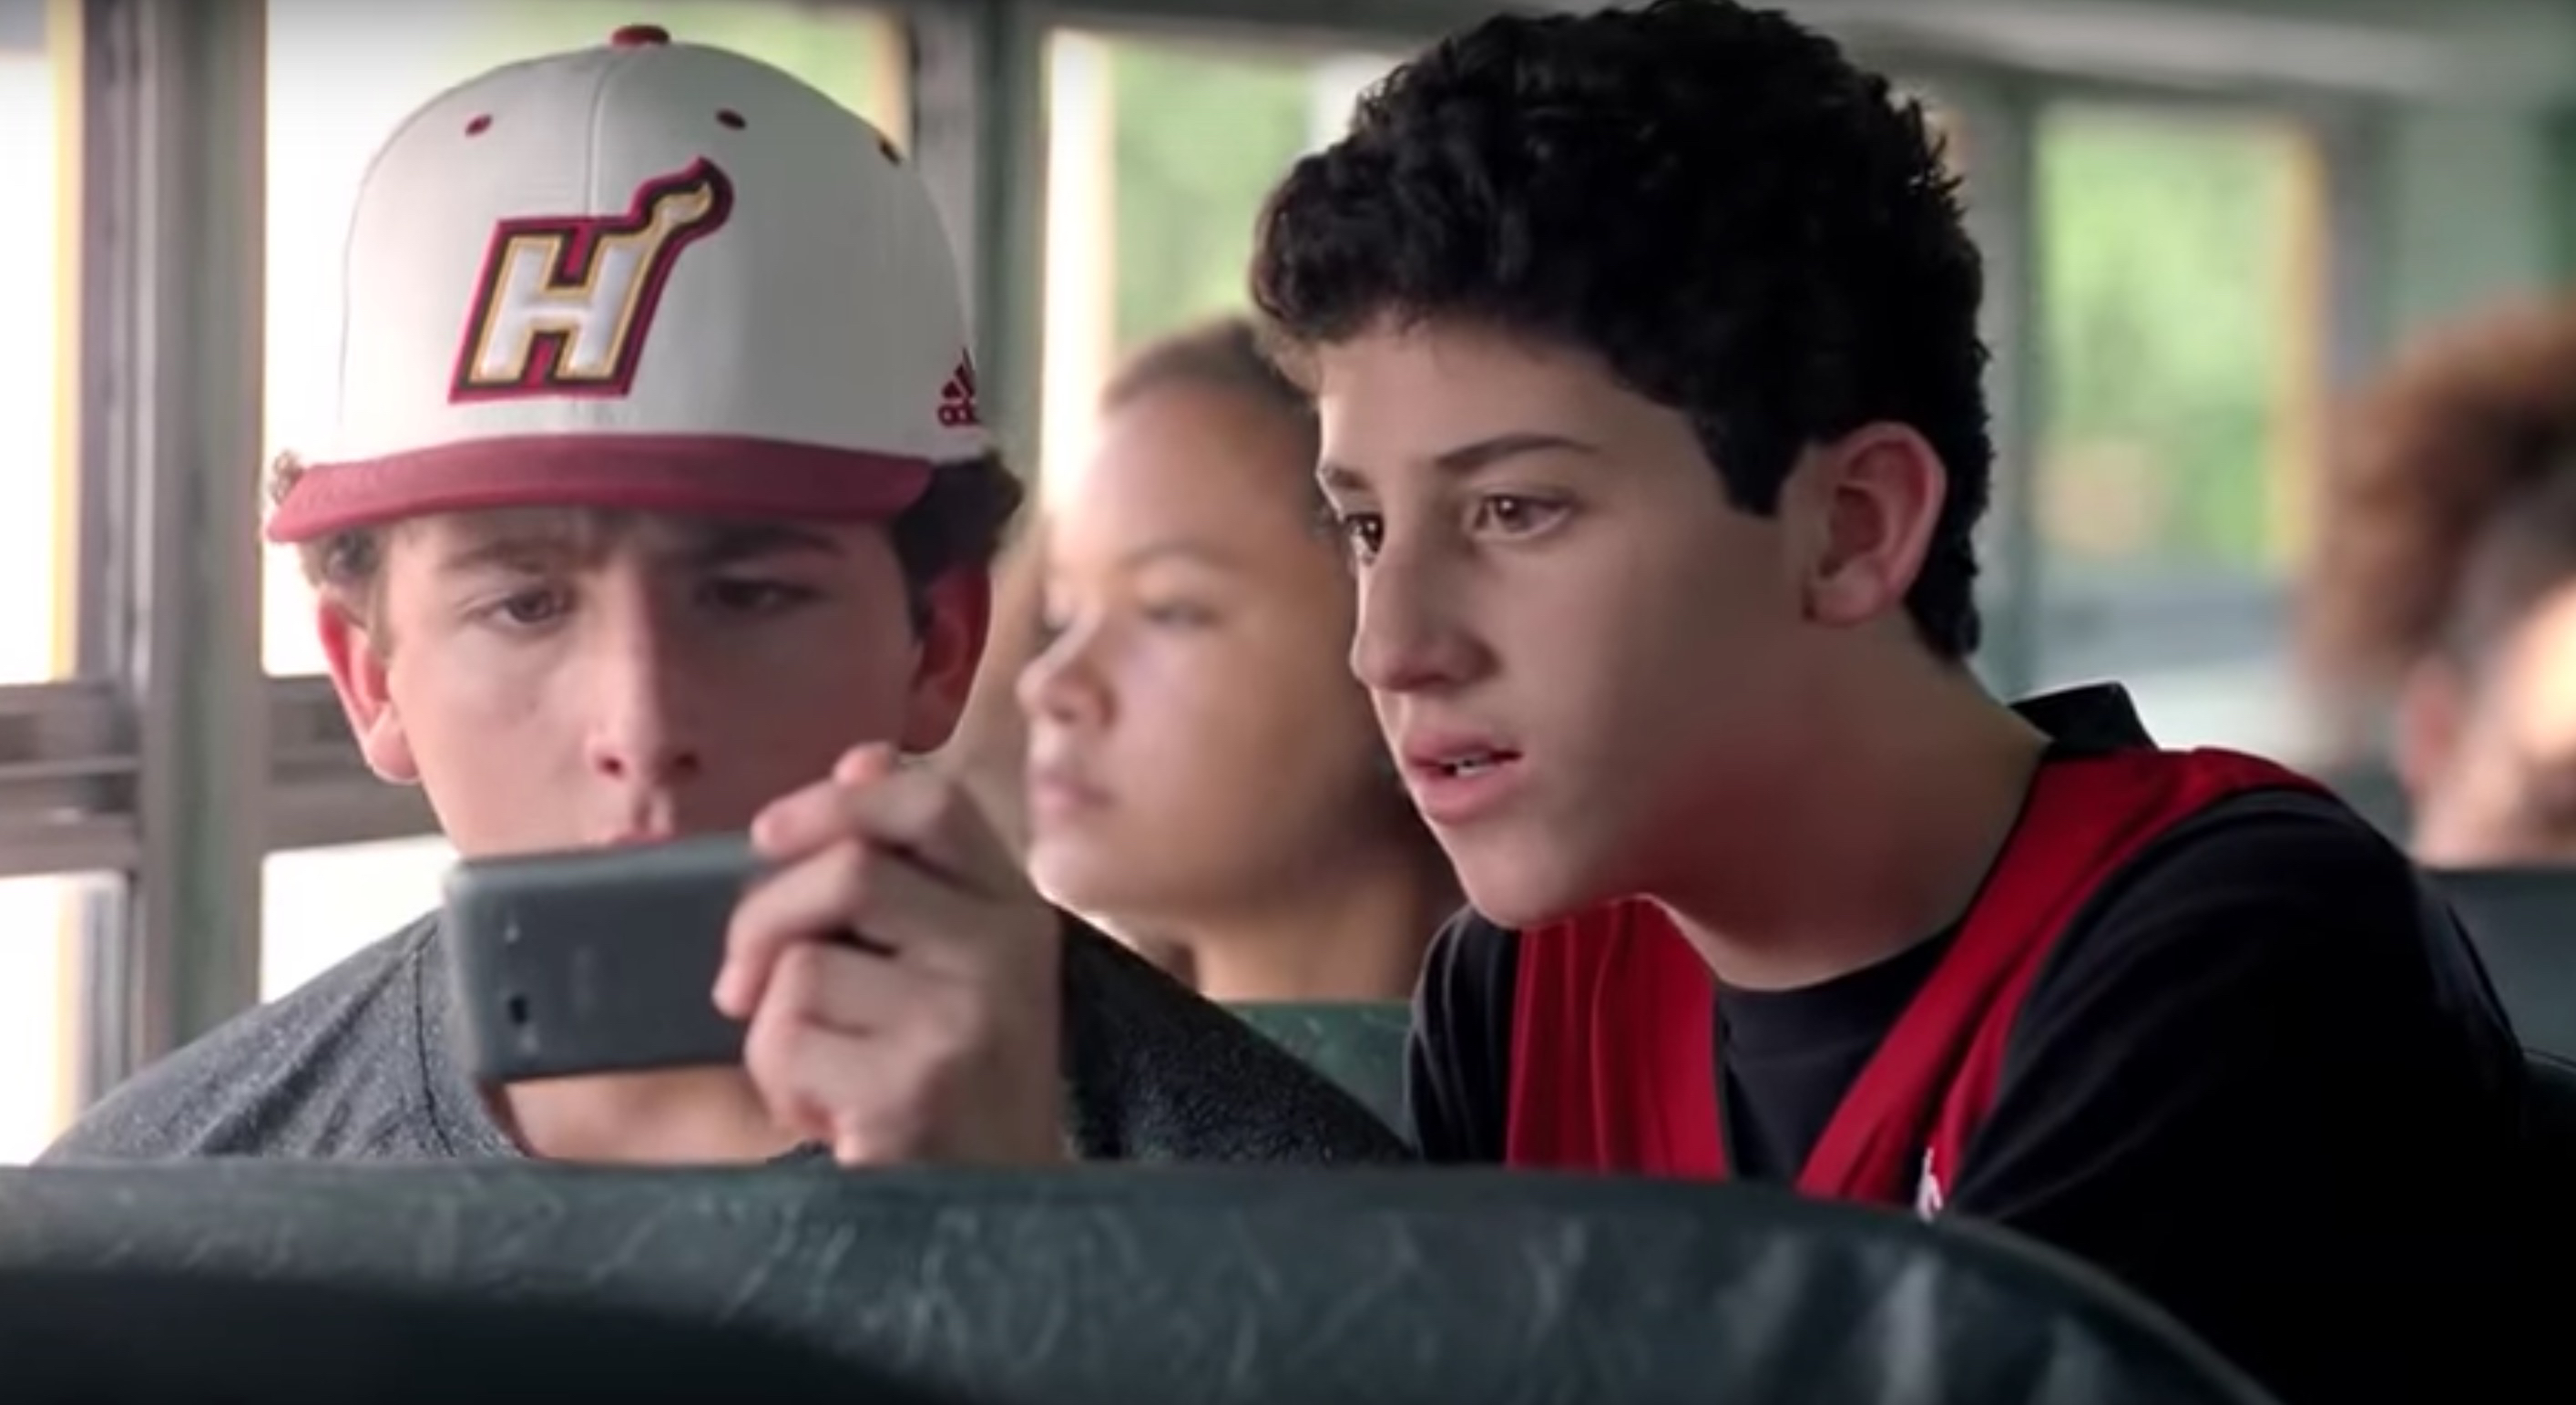 This six year-old commercial predicted Dwyane Wade would go to Chicago ...